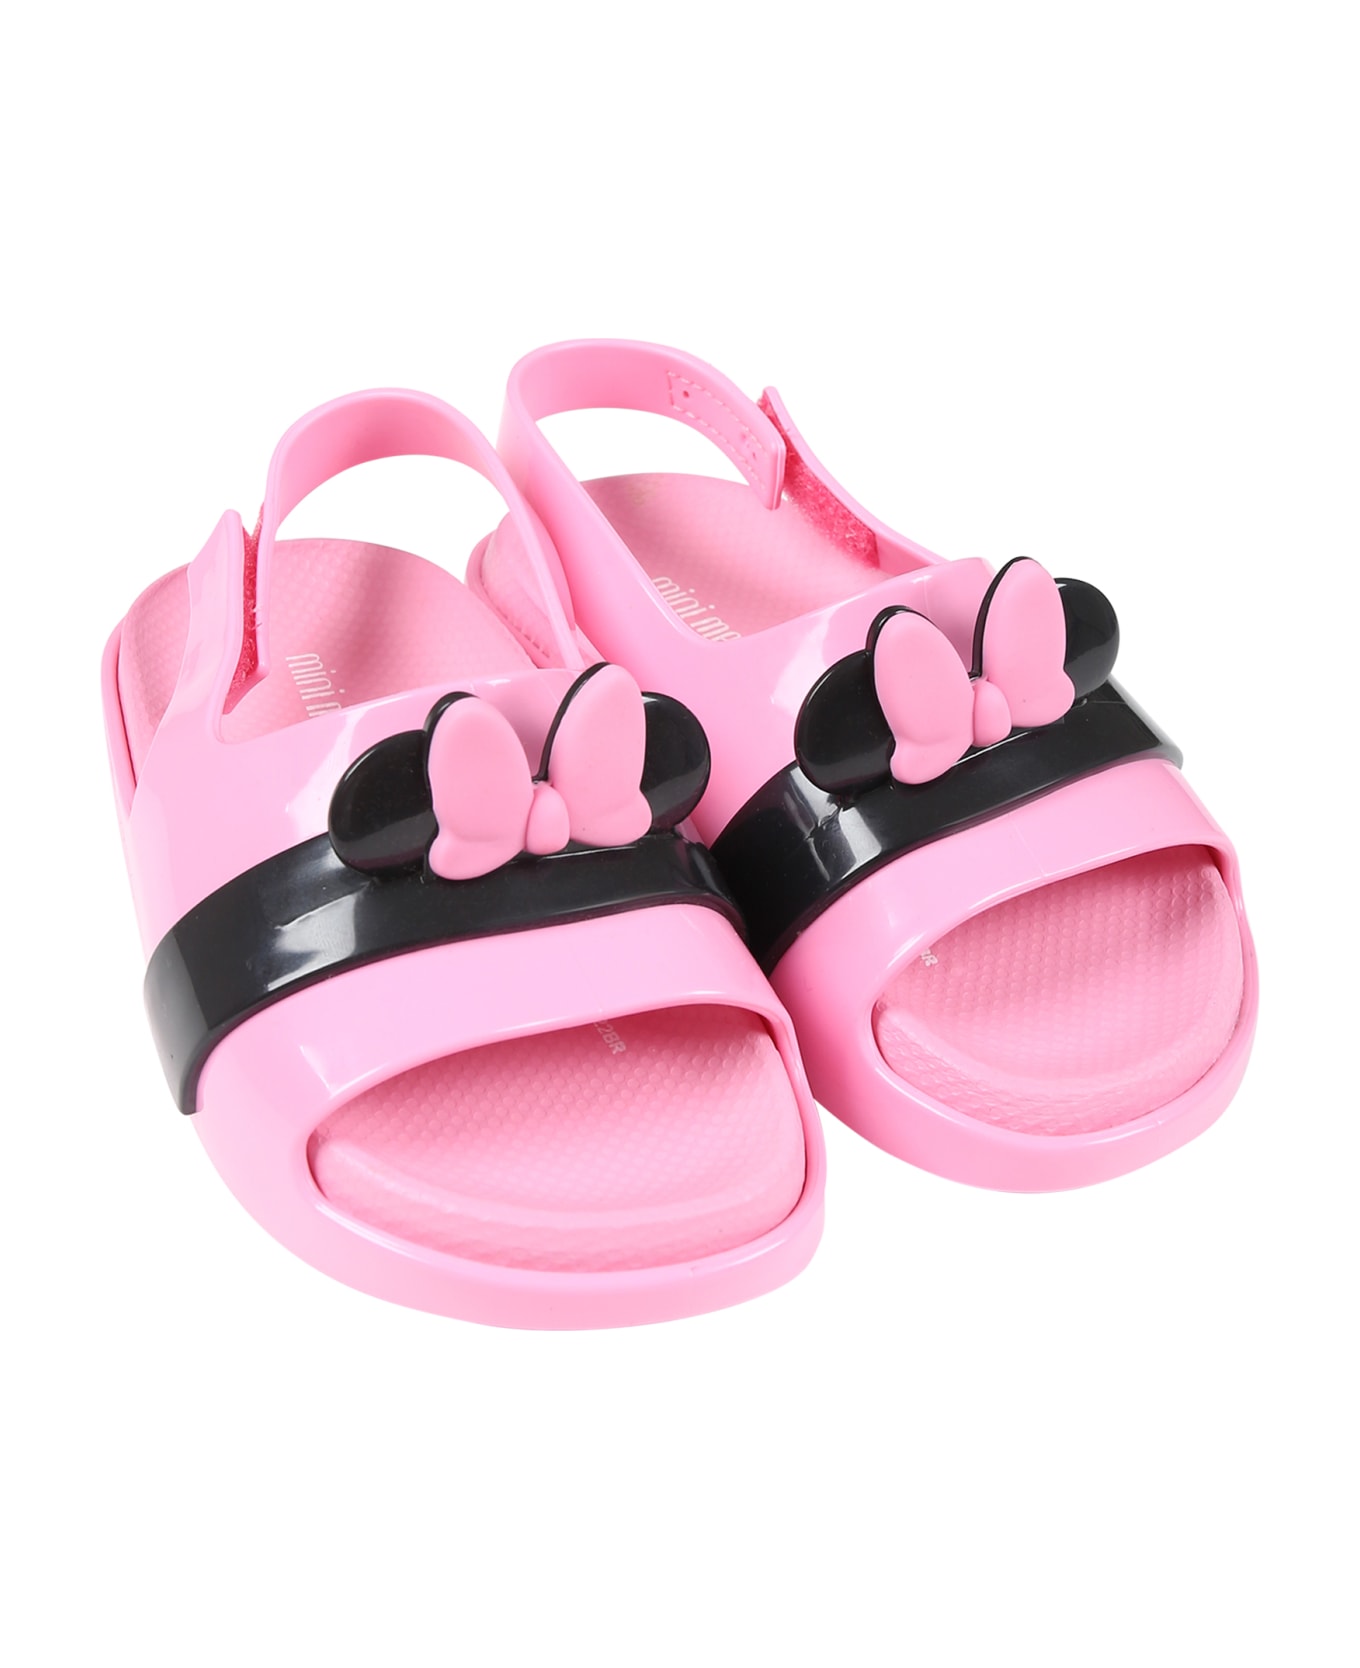 Melissa Pink Sandals For Girl With Minnie Ears - Pink